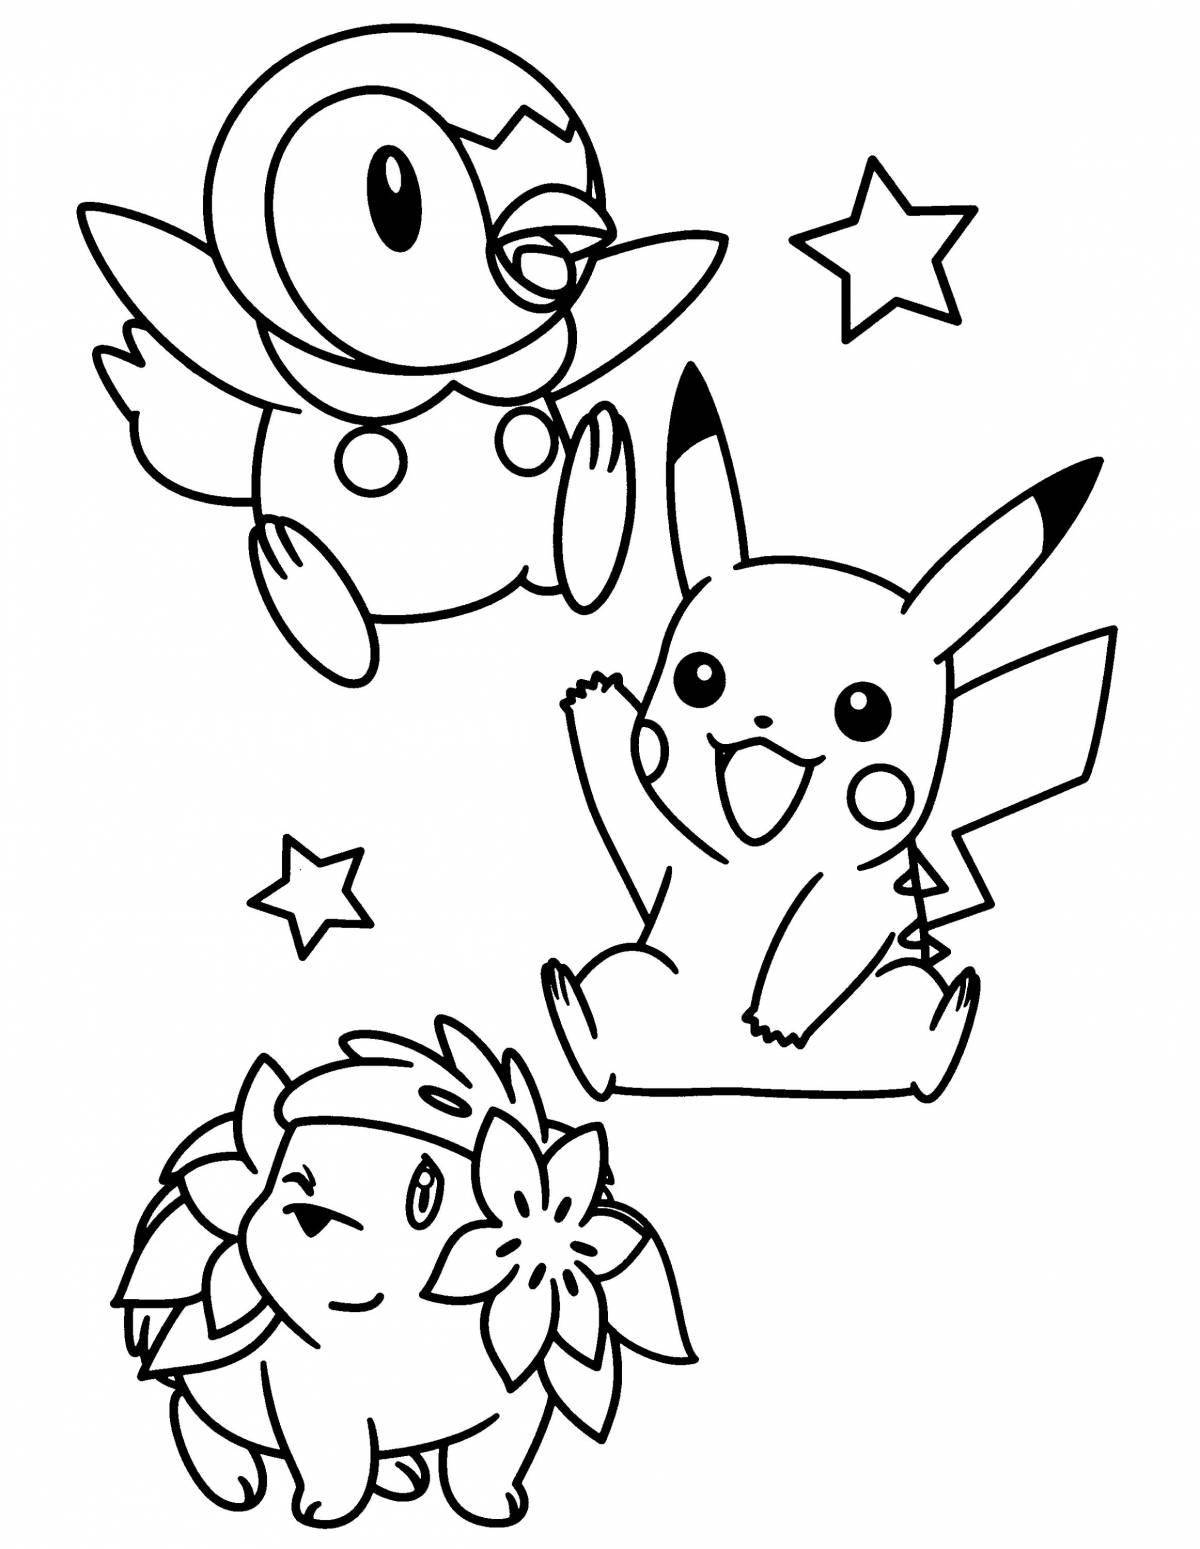 Amazing piplap pokemon coloring page